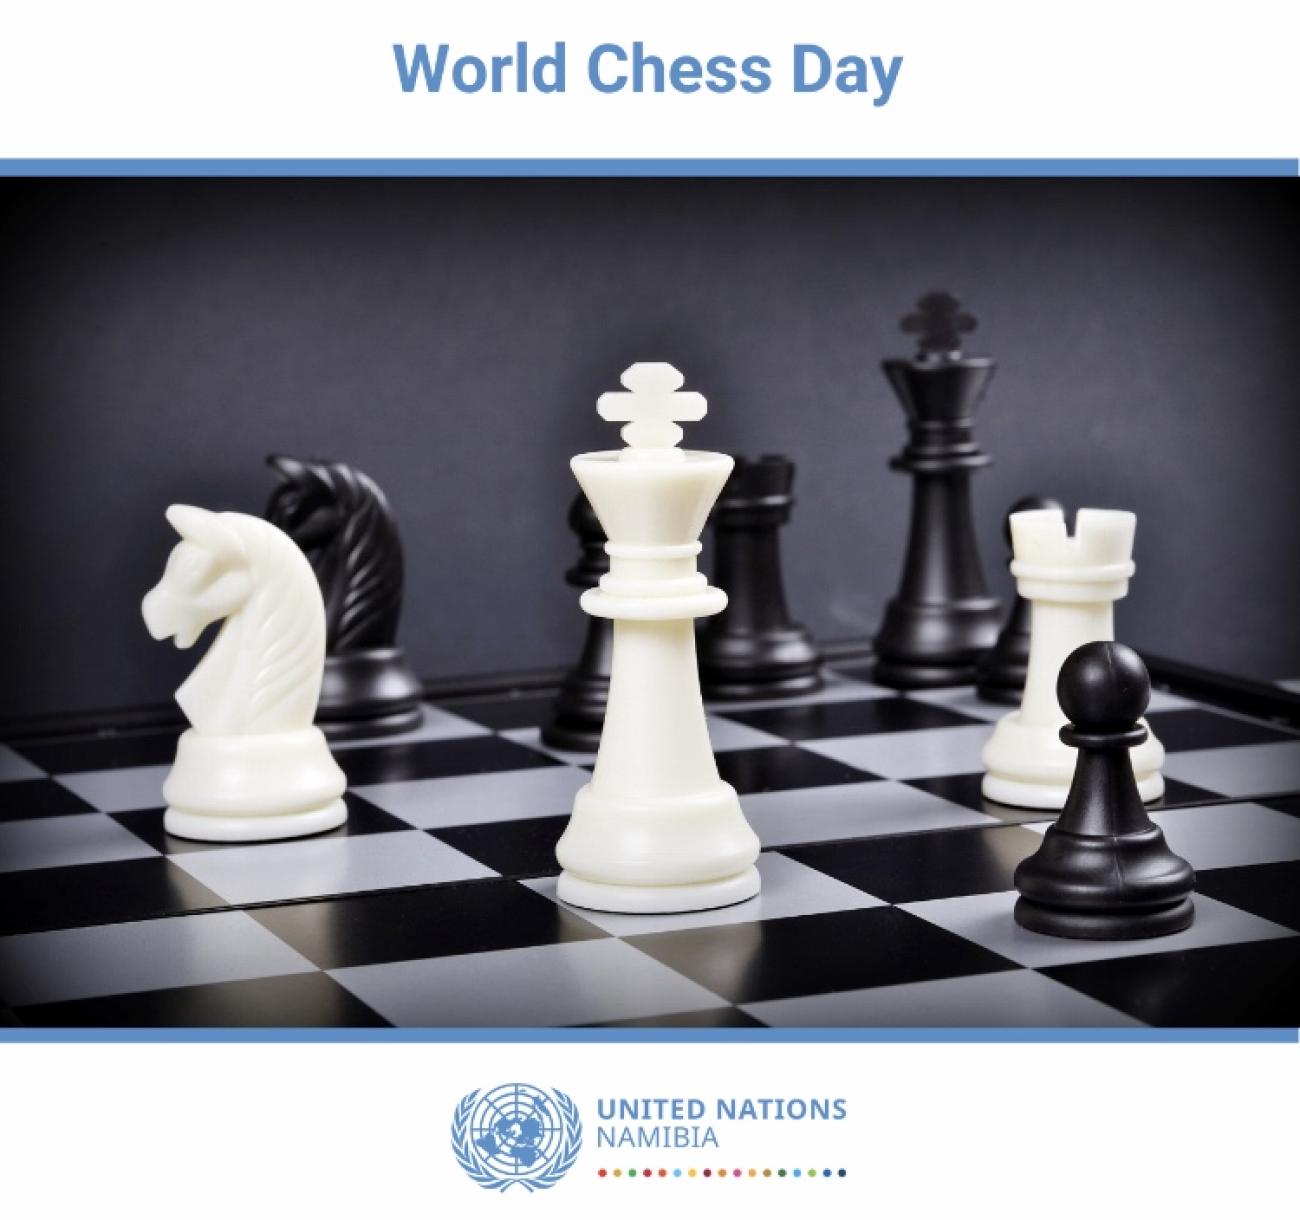 World Chess Day - 20 July  United Nations in Indonesia